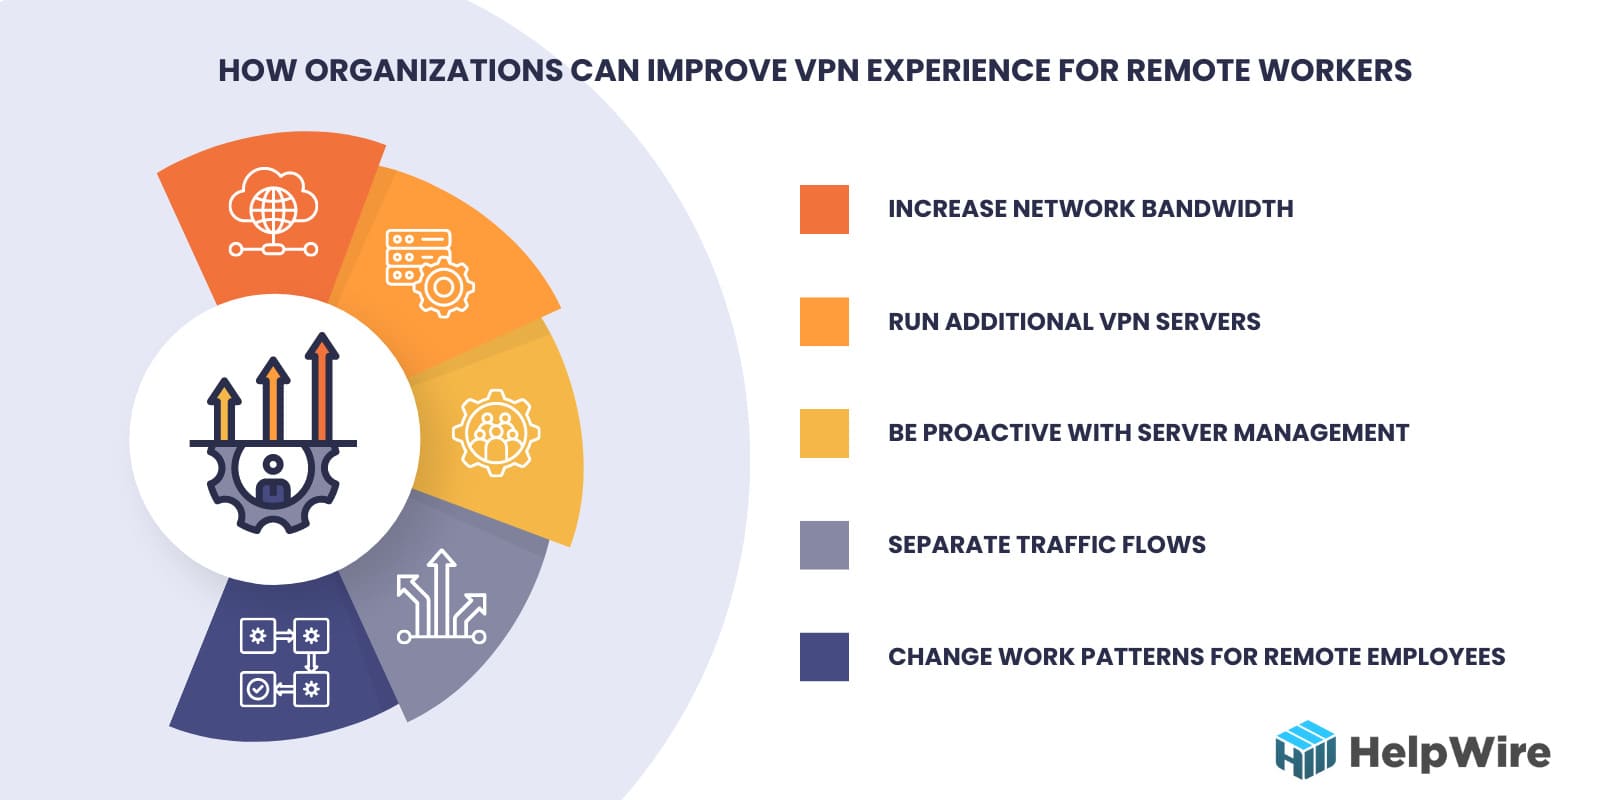 improve VPN experience for remote workers